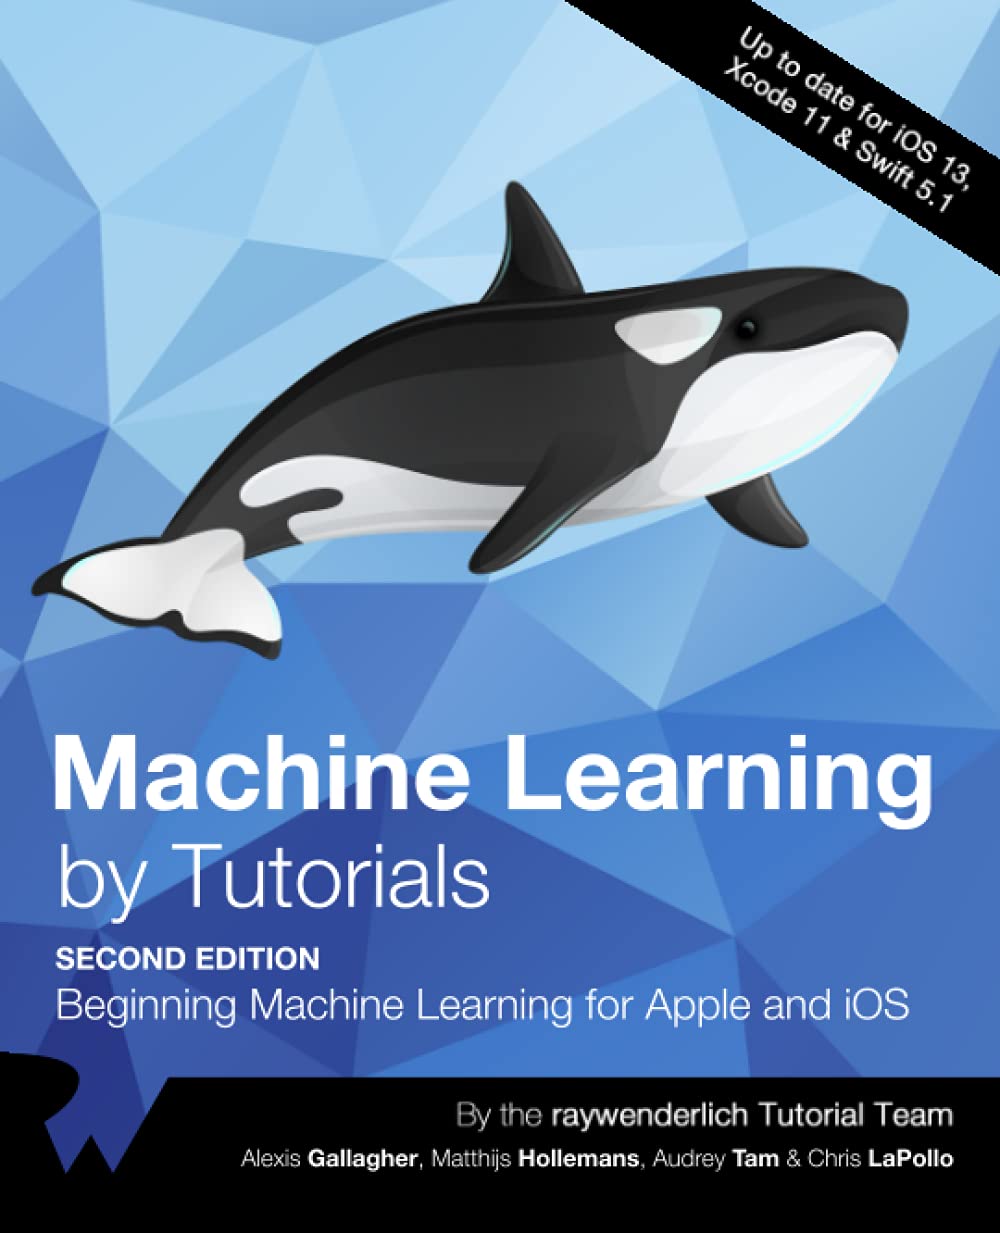 (EBook PDF)Machine Learning by Tutorials (Second Edition): Beginning Machine Learning for Apple and iOS by raywenderlich Tutorial Team, Alexis Gallagher, Matthijs Hollemans, ＆amp; 2 more